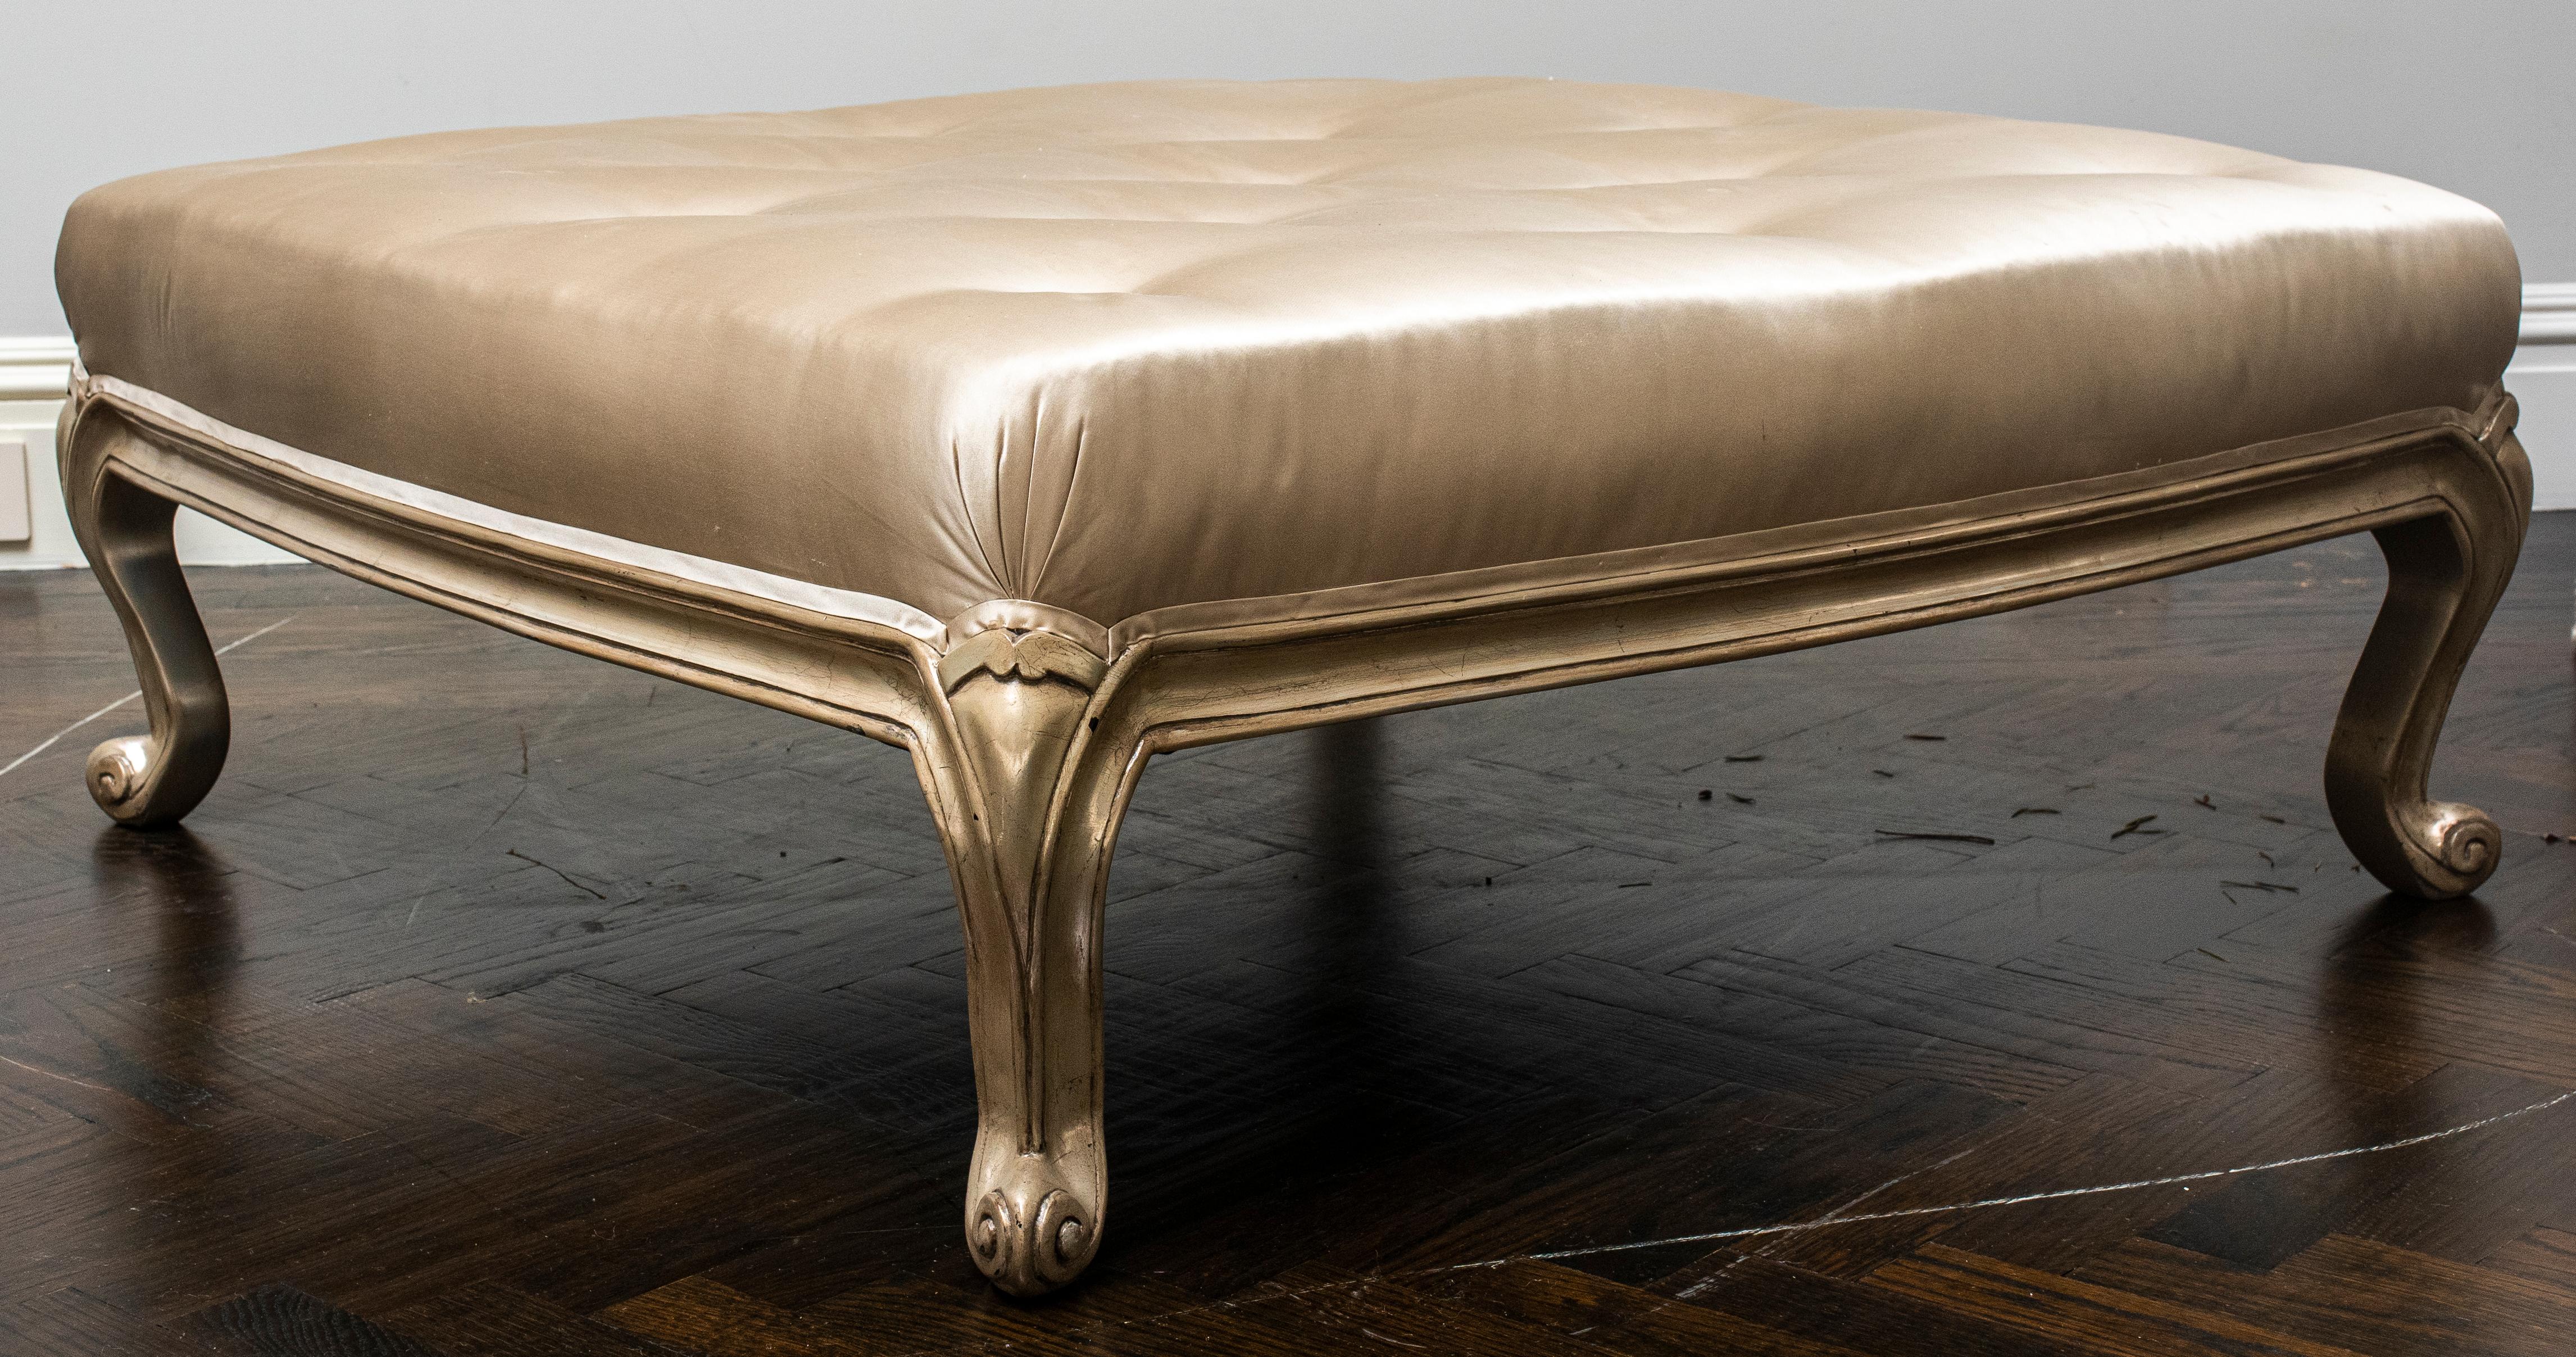 Louis XV style large carved and silvered wood upholstered ottoman with cabriole legs. Provenance: Property from an Upper East Side townhouse.

Dealer: S138XX